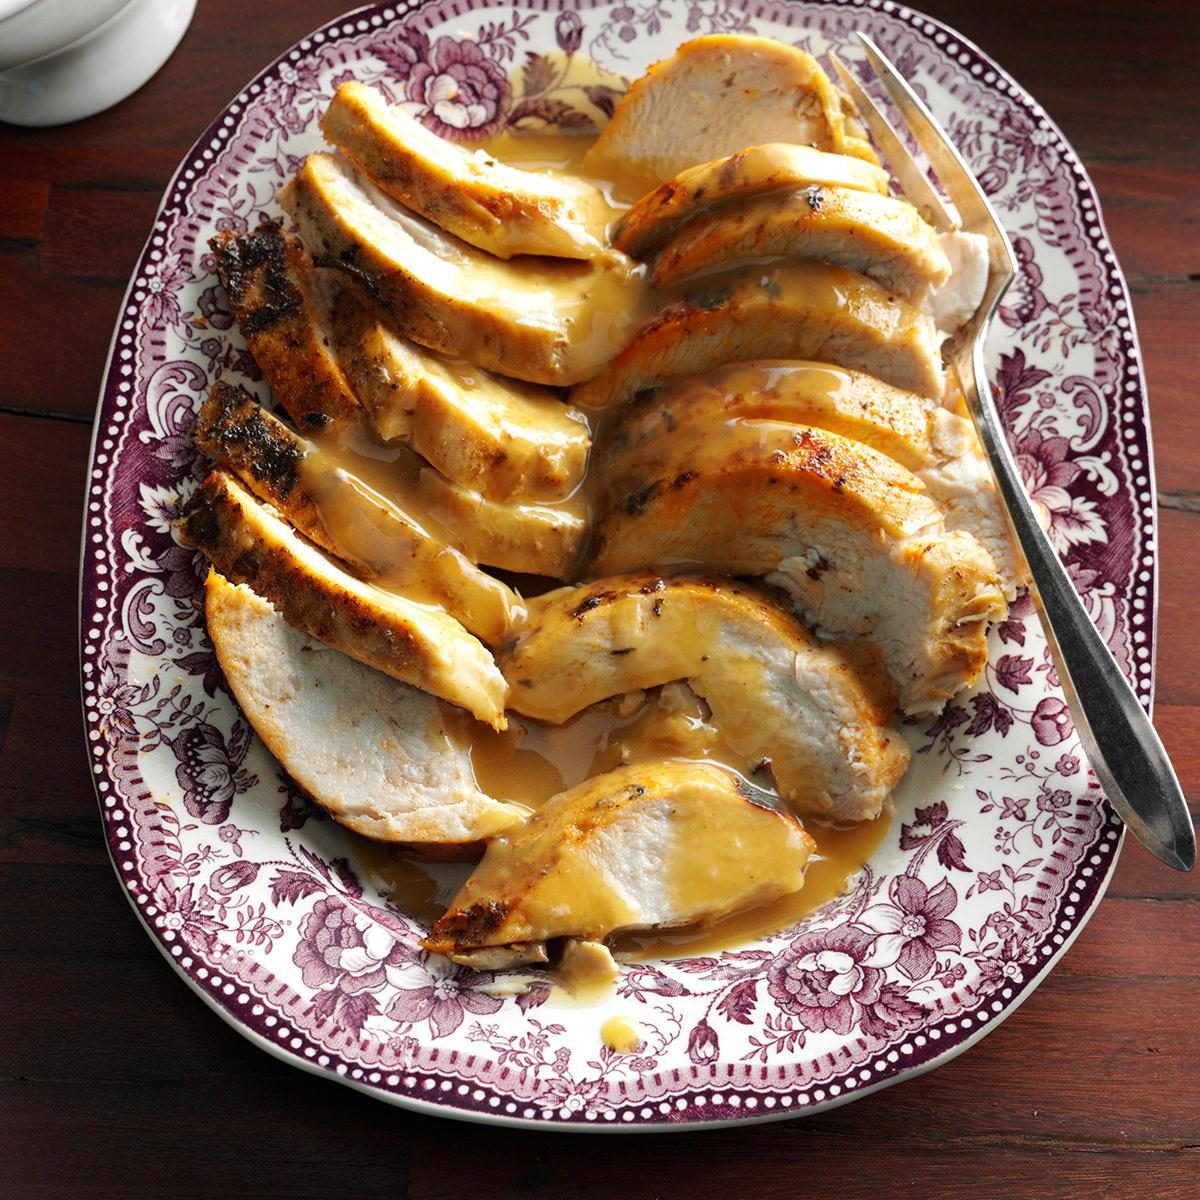 Slow Cooker Turkey Breast With Gravy Exps Sdon16 190555 B06 09 4b